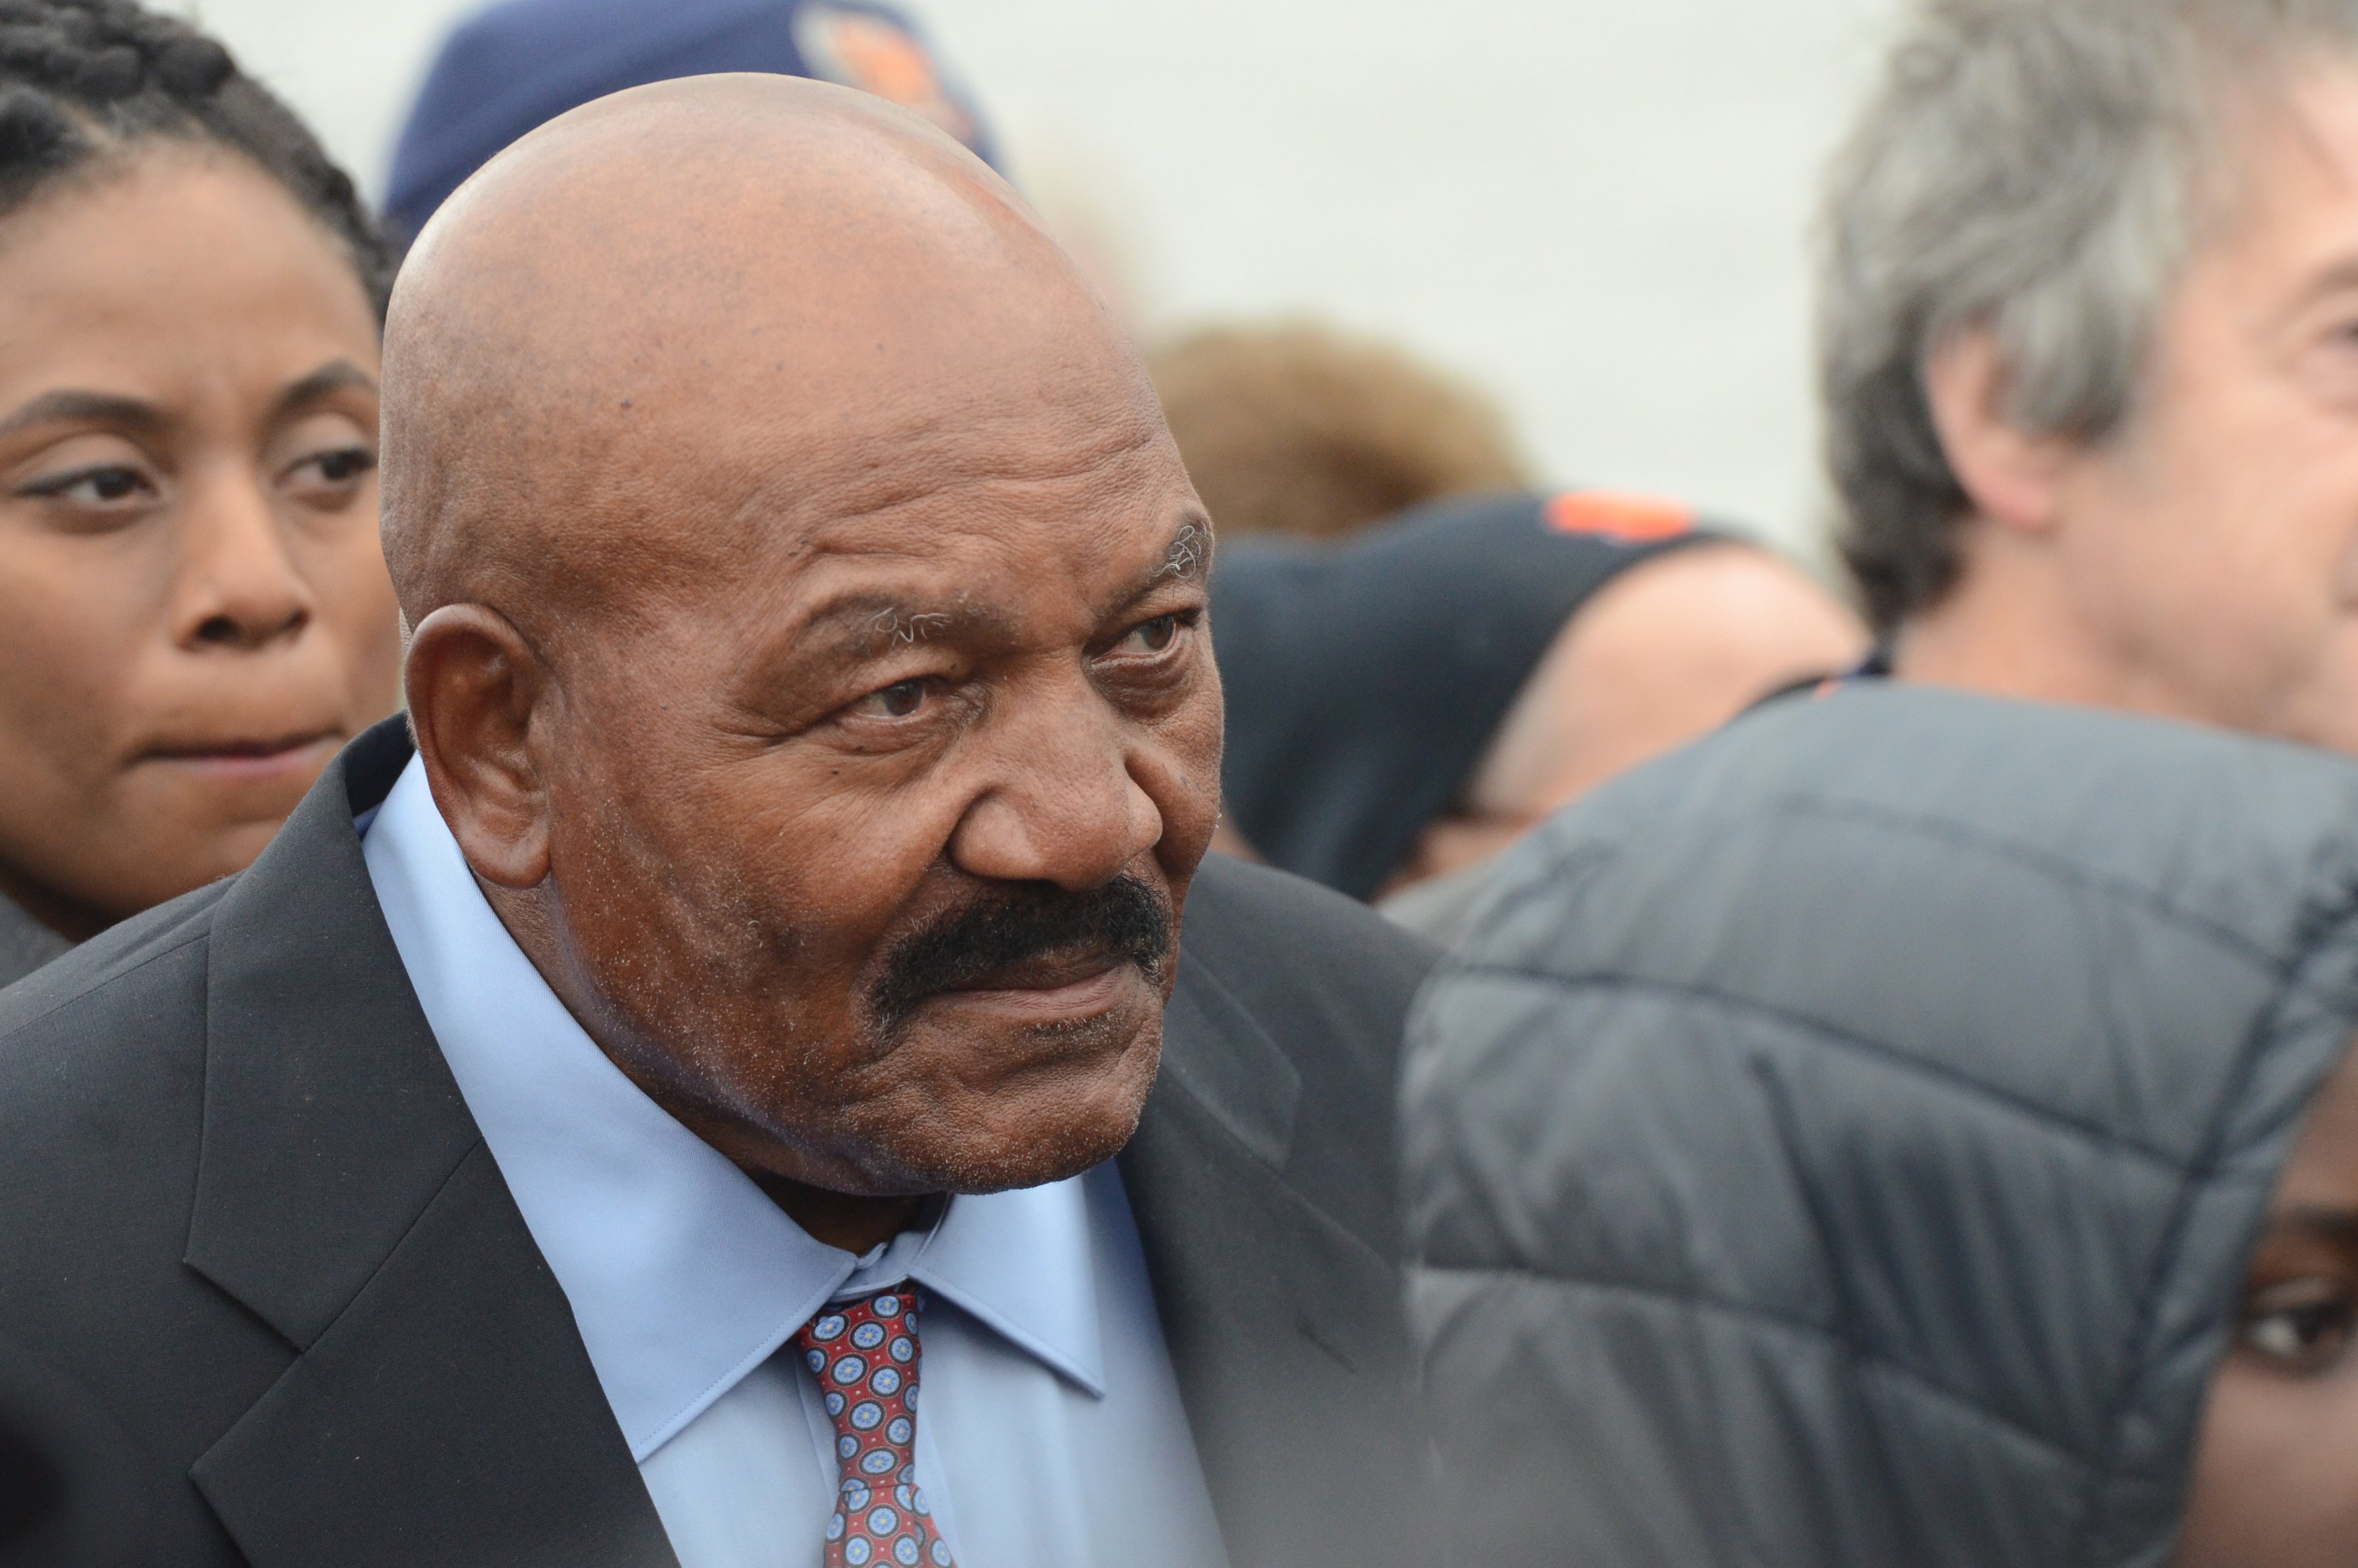 Syracuse football great Jim Brown attends the Plaza 44 dedication next to the Ensley Athletic Center on November 14th 2015. Statues of Syracuse football greats Ernie Davis, Jim Brown, Floyd Little and legendary coach Ben Schwartzwalder were unveiled. Stephen D. Cannerelli | scannerelli@syracuse.com <mailto:scannerelli@syracuse.comfbp>